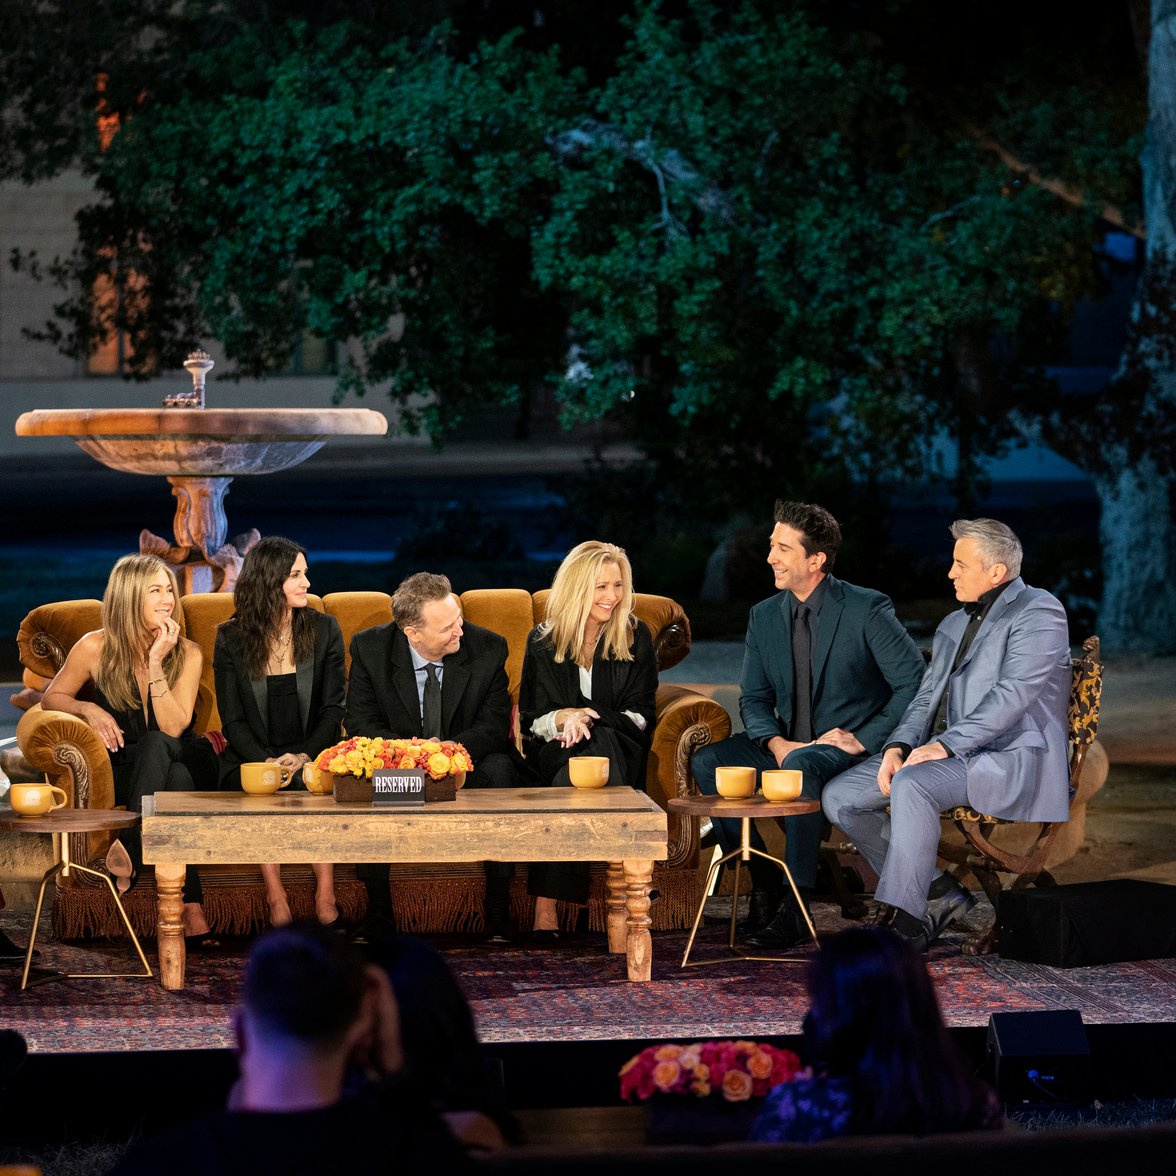 The cast of 'Friends' sits on the iconic orange couch for the reunion special